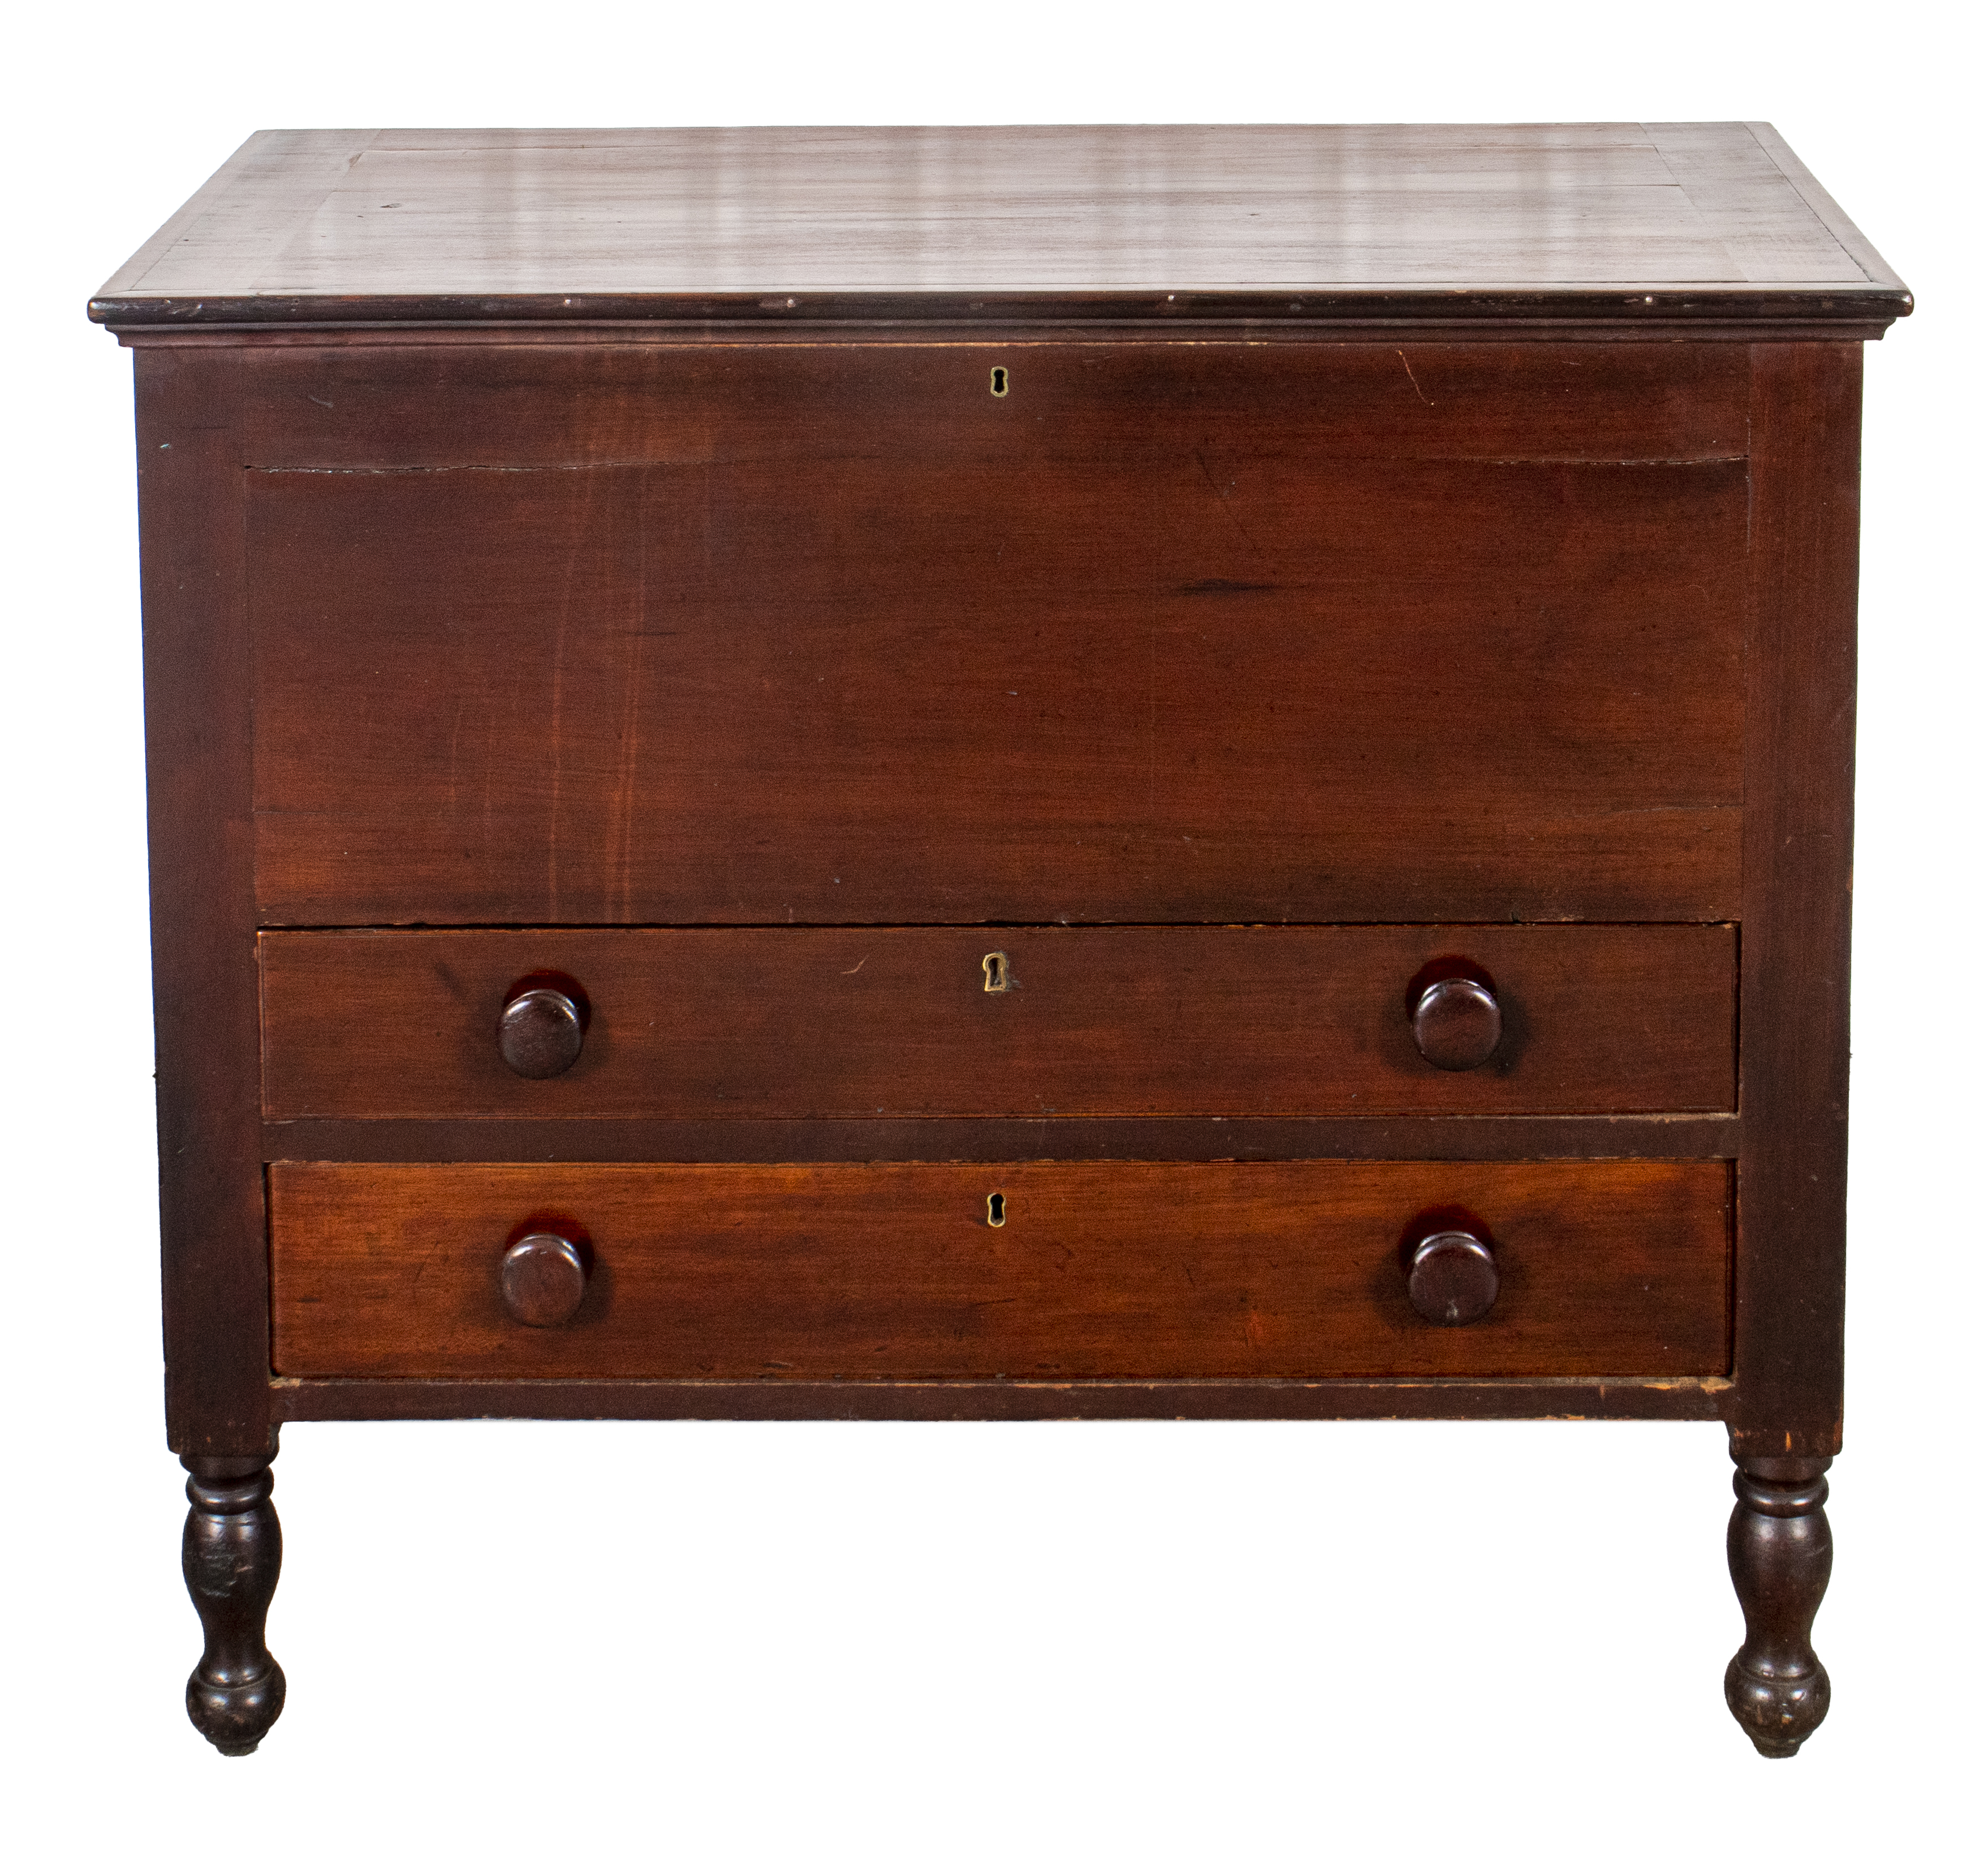 CLASSICAL WOOD CABINET WITH CASKET